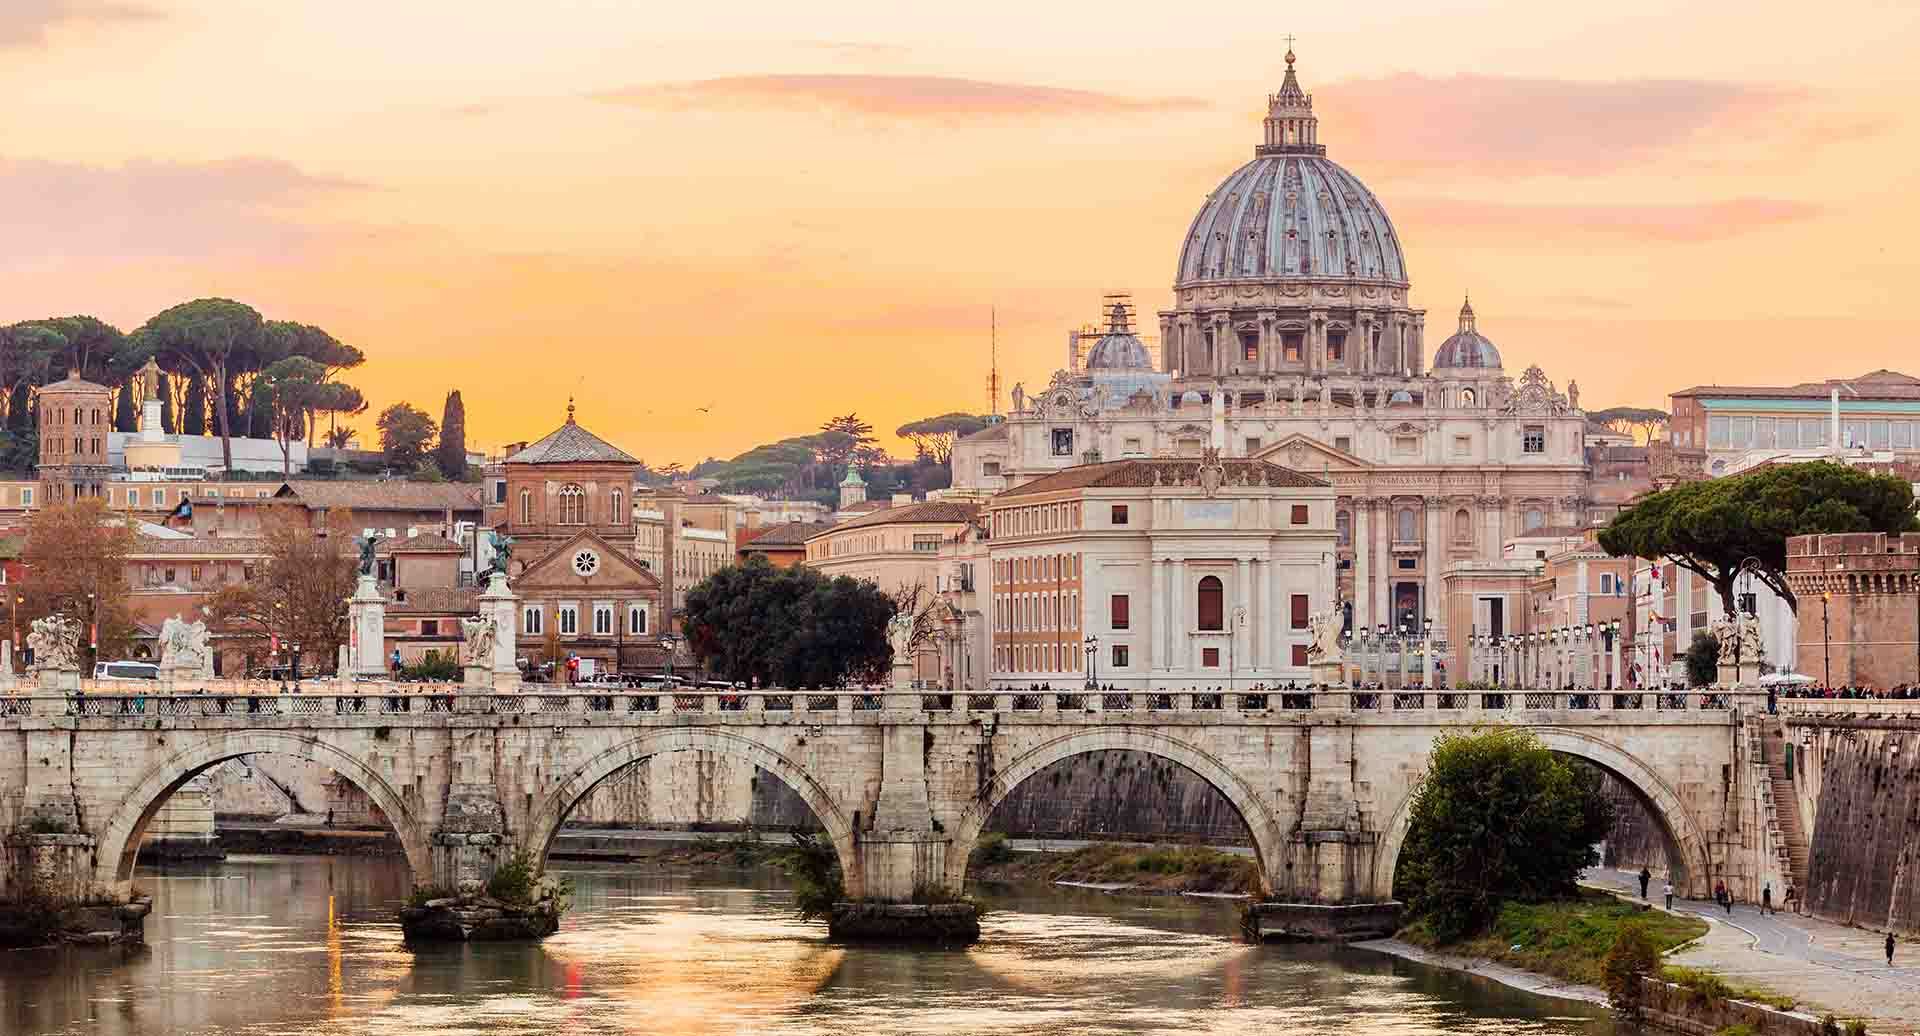 Picture showing a river in Rome and, in the background, a white stone bridge with arches through which the river is flowing; behind it, there are several buildings, a sunset, and an orange sky.